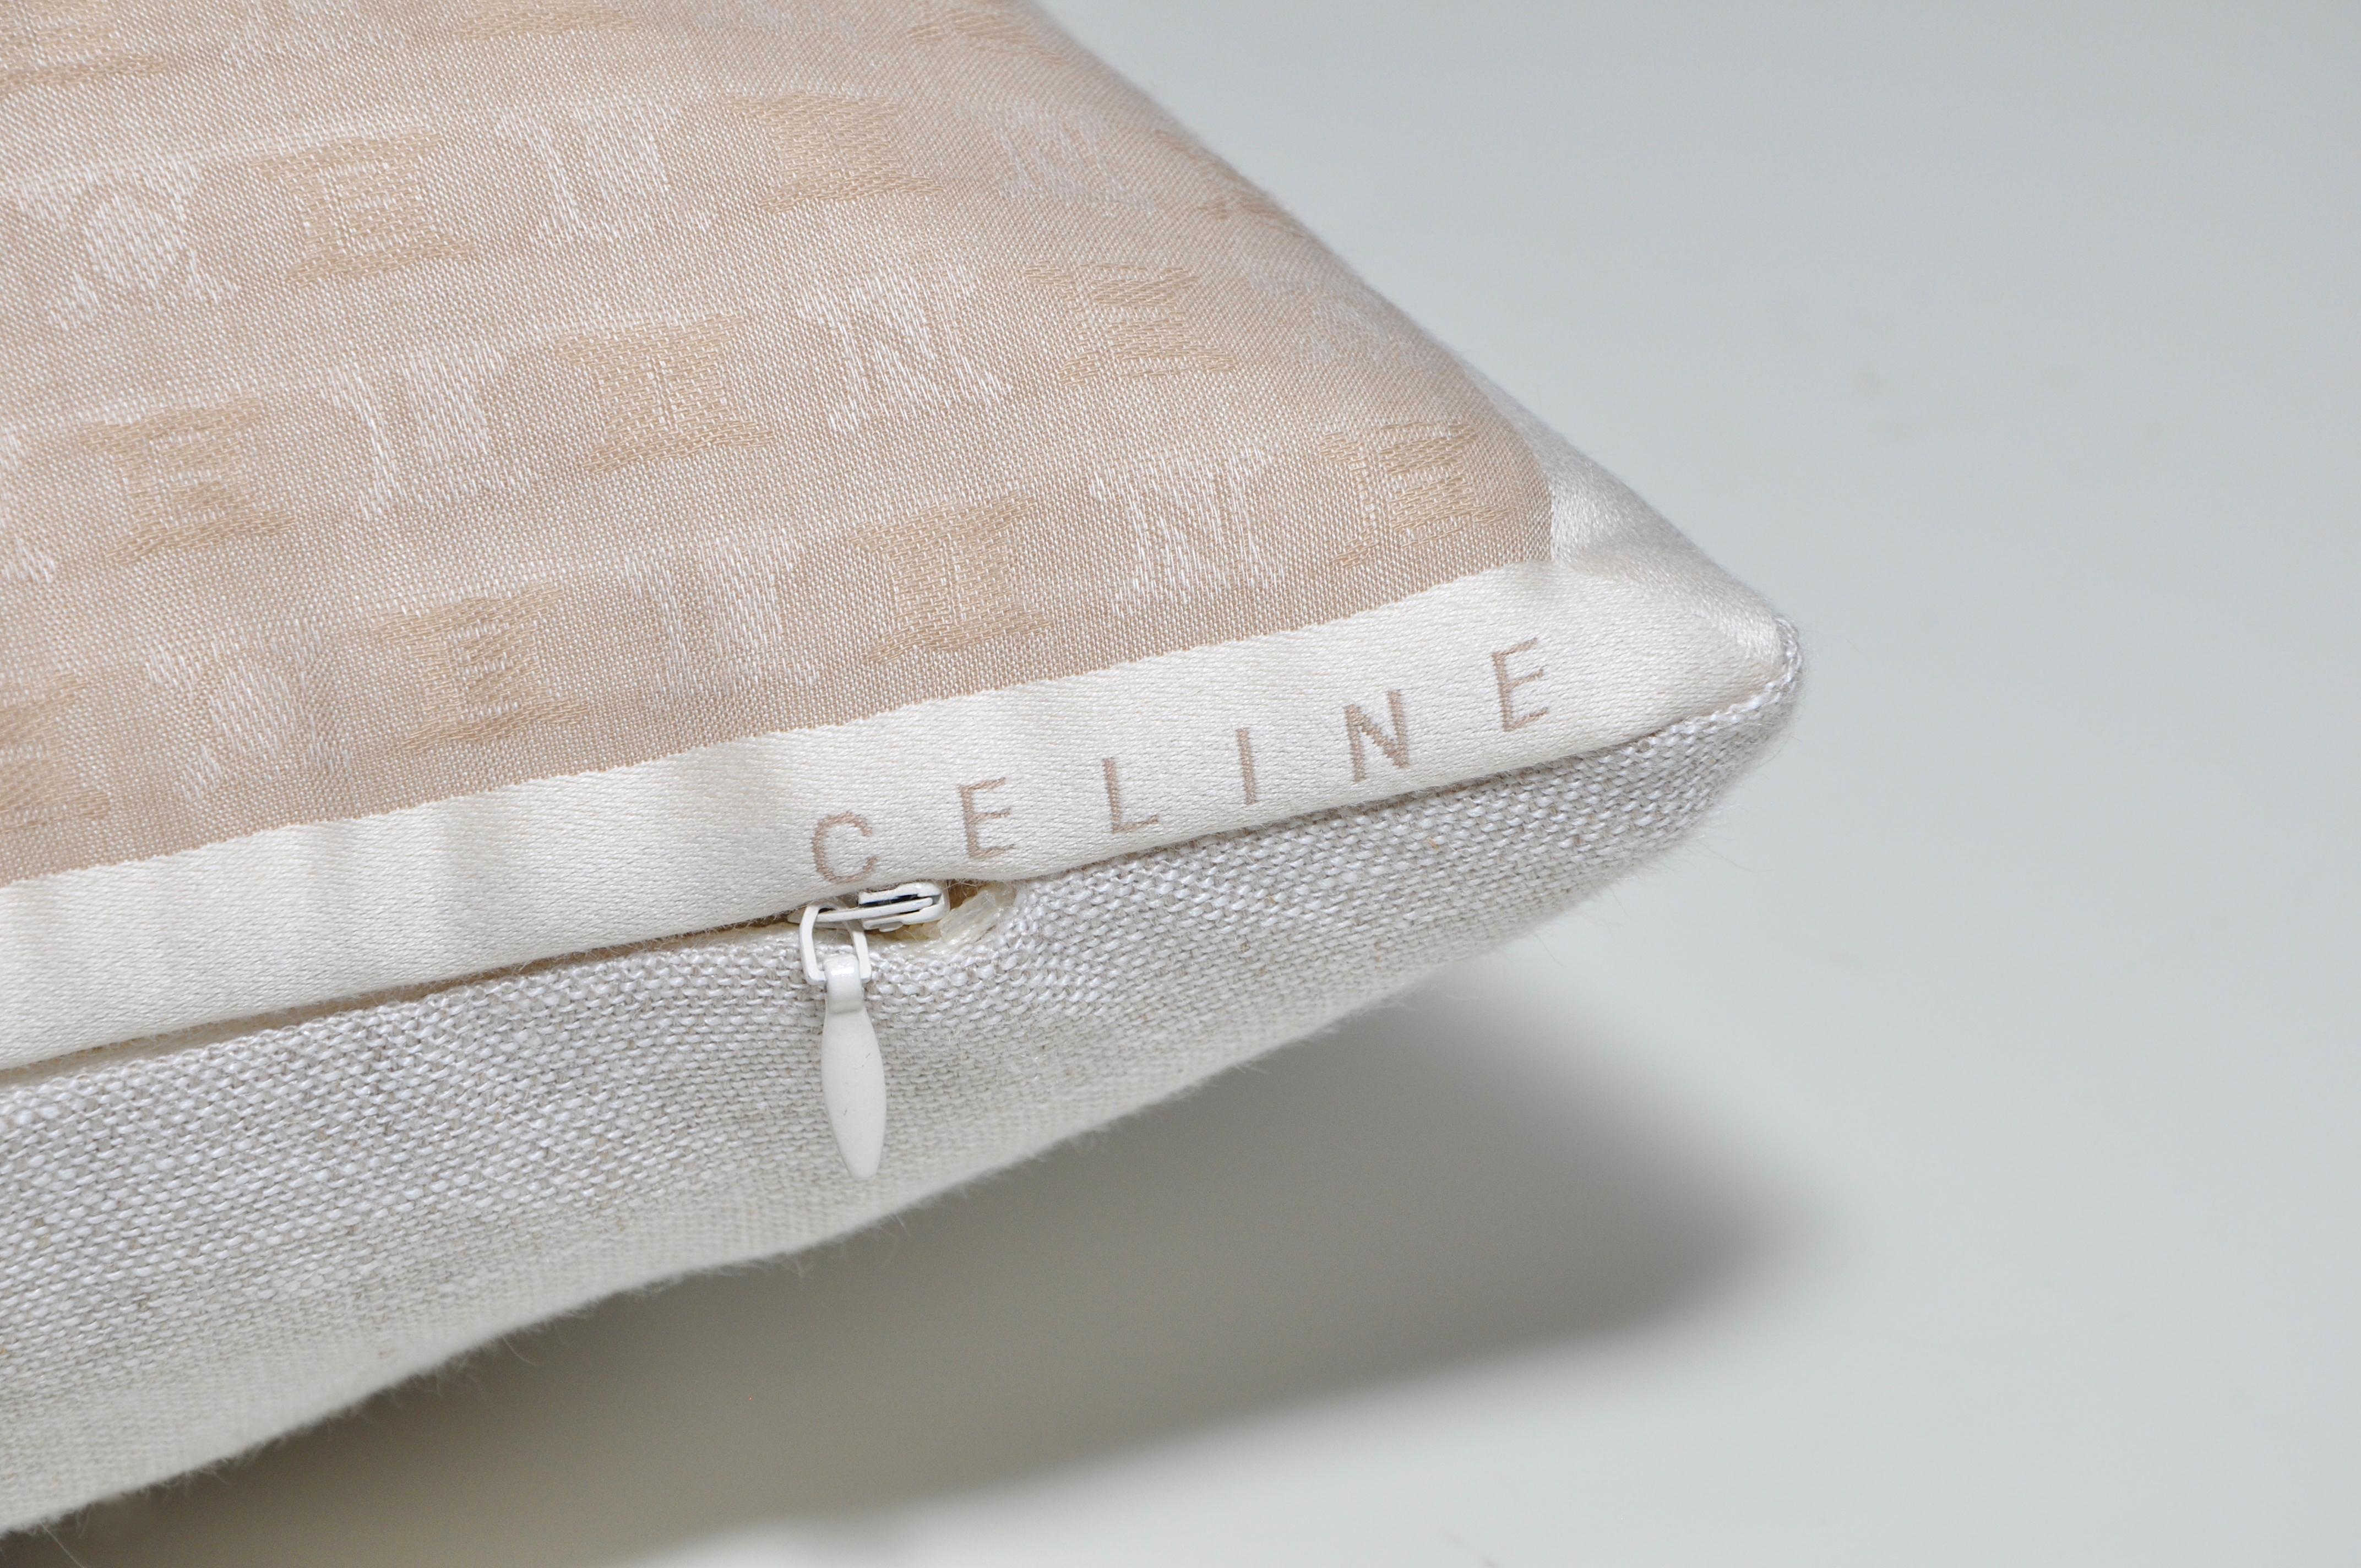 This cushion is a one-of-a-kind and part of a sustainability project. It has been created from an up-cycled, recycled luxury fabric, used with the intentions of promoting a more eco-friendly environment by using already existing materials. We both